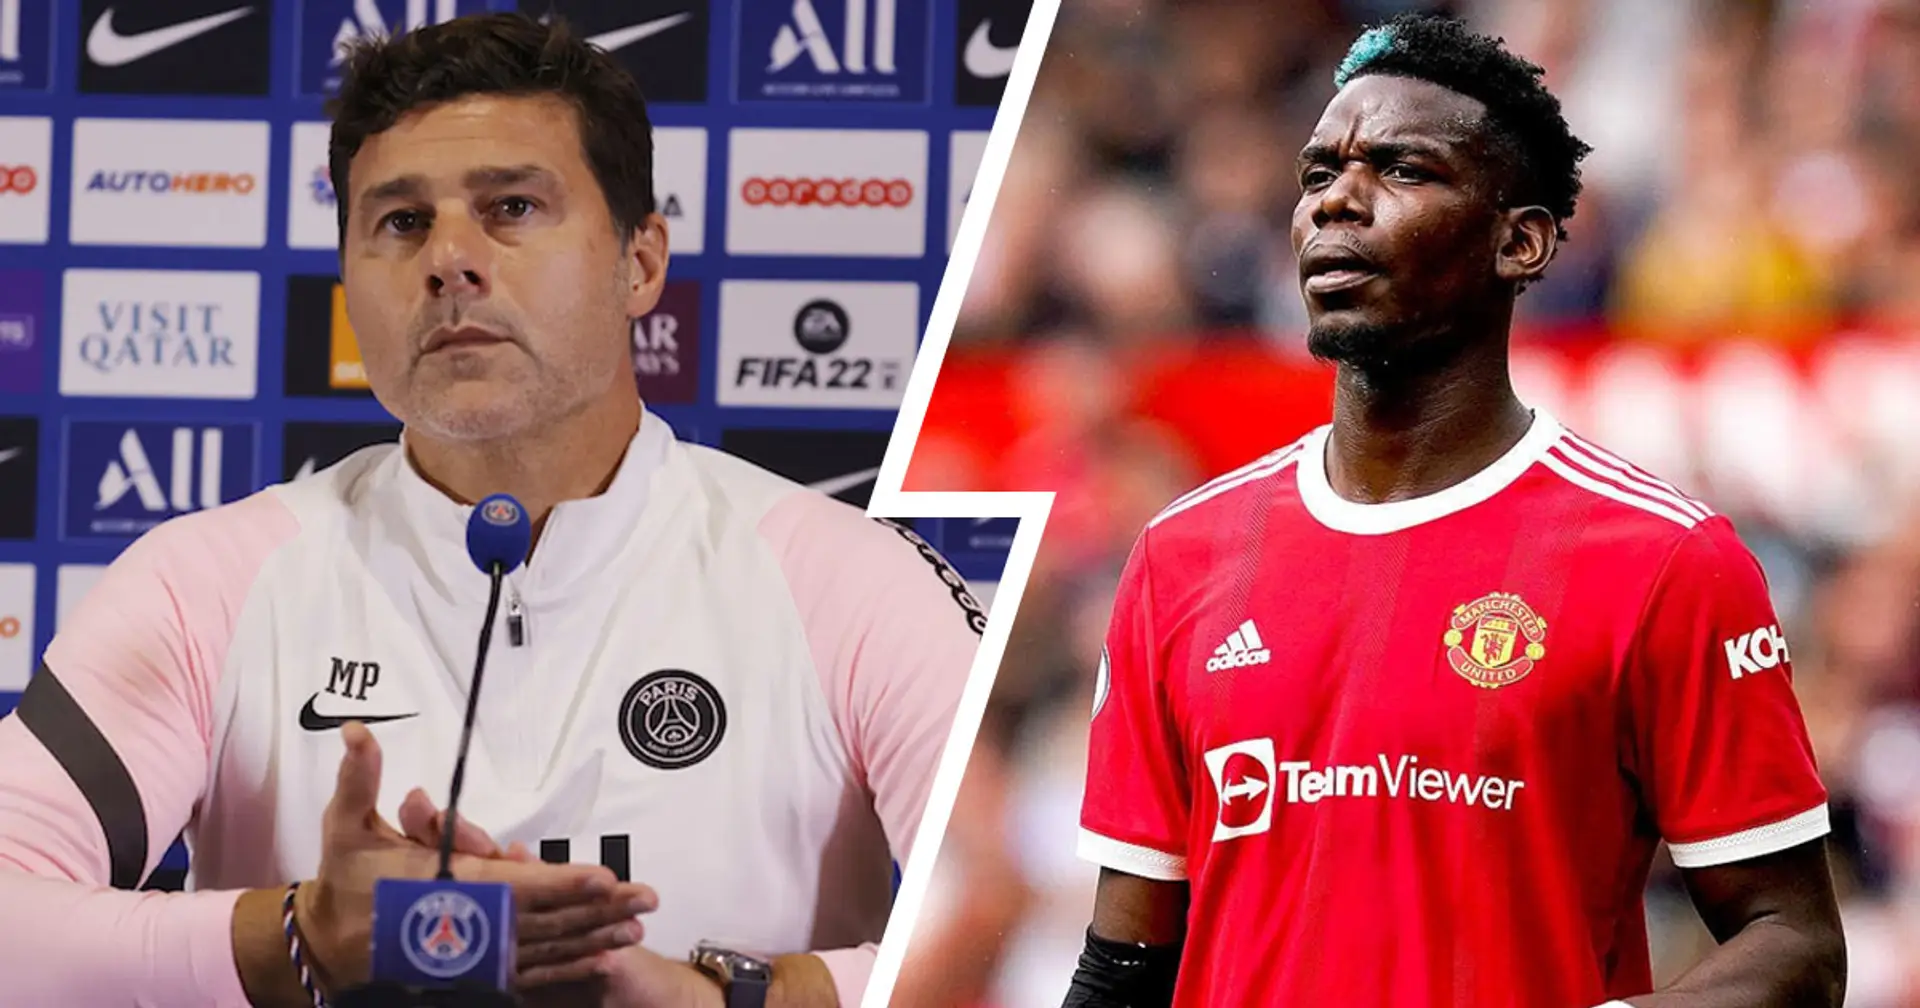 'PSG is always open to improving its workforce': Mauricio Pochettino refuses to rule out Pogba transfer